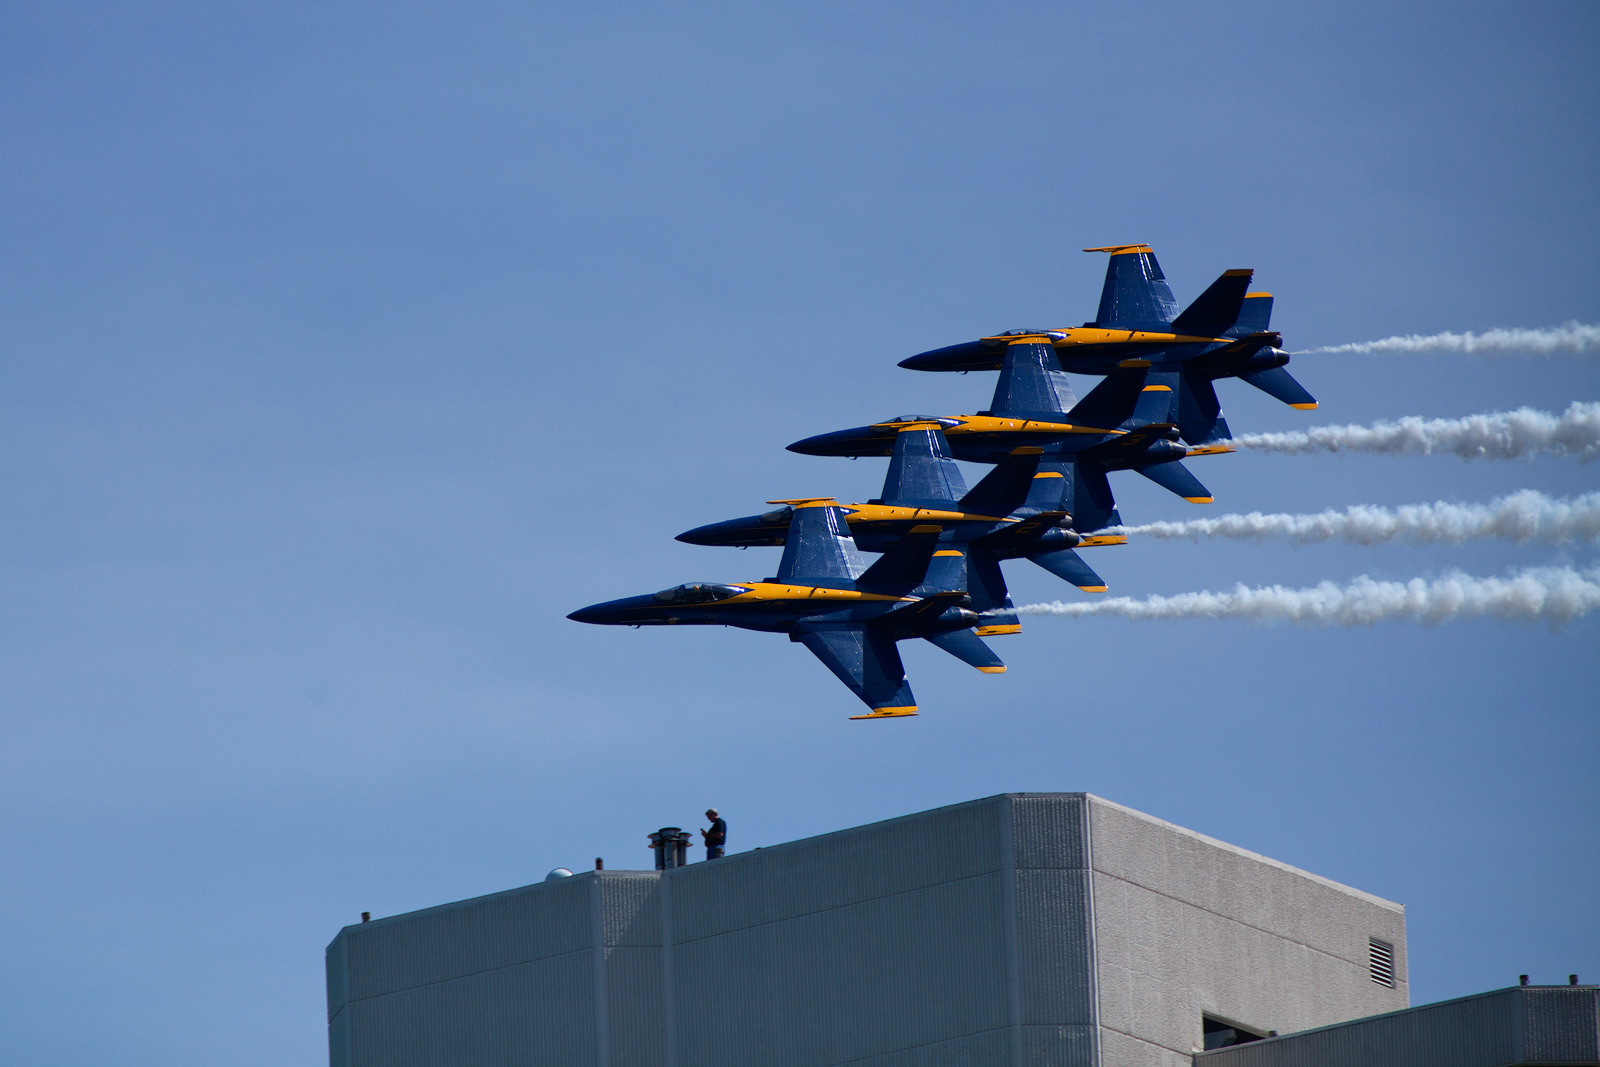 Blue Angels flying behind man working on a roof